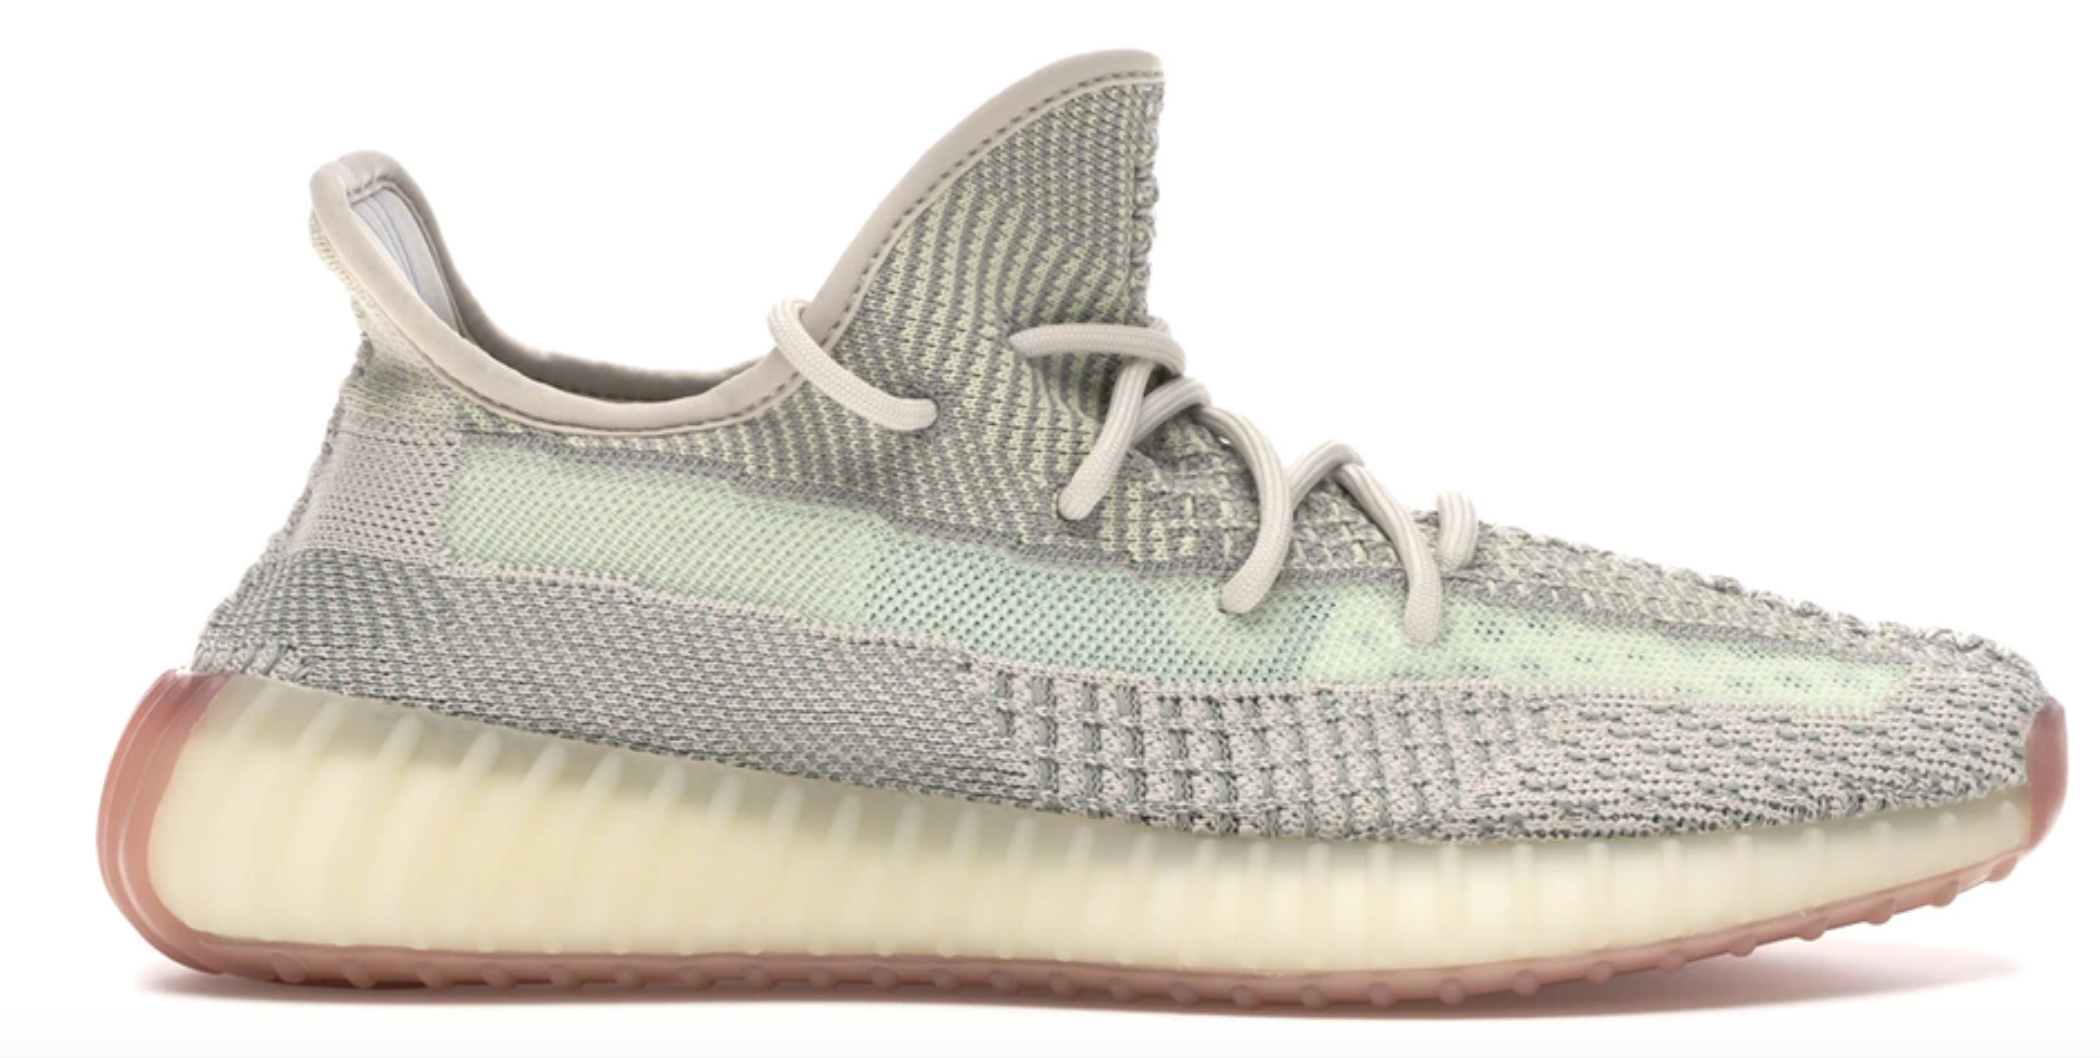 YEEZY BOOST 350 V2 CITRIN (NON-REFLECTIVE) - The Edit Man London Online